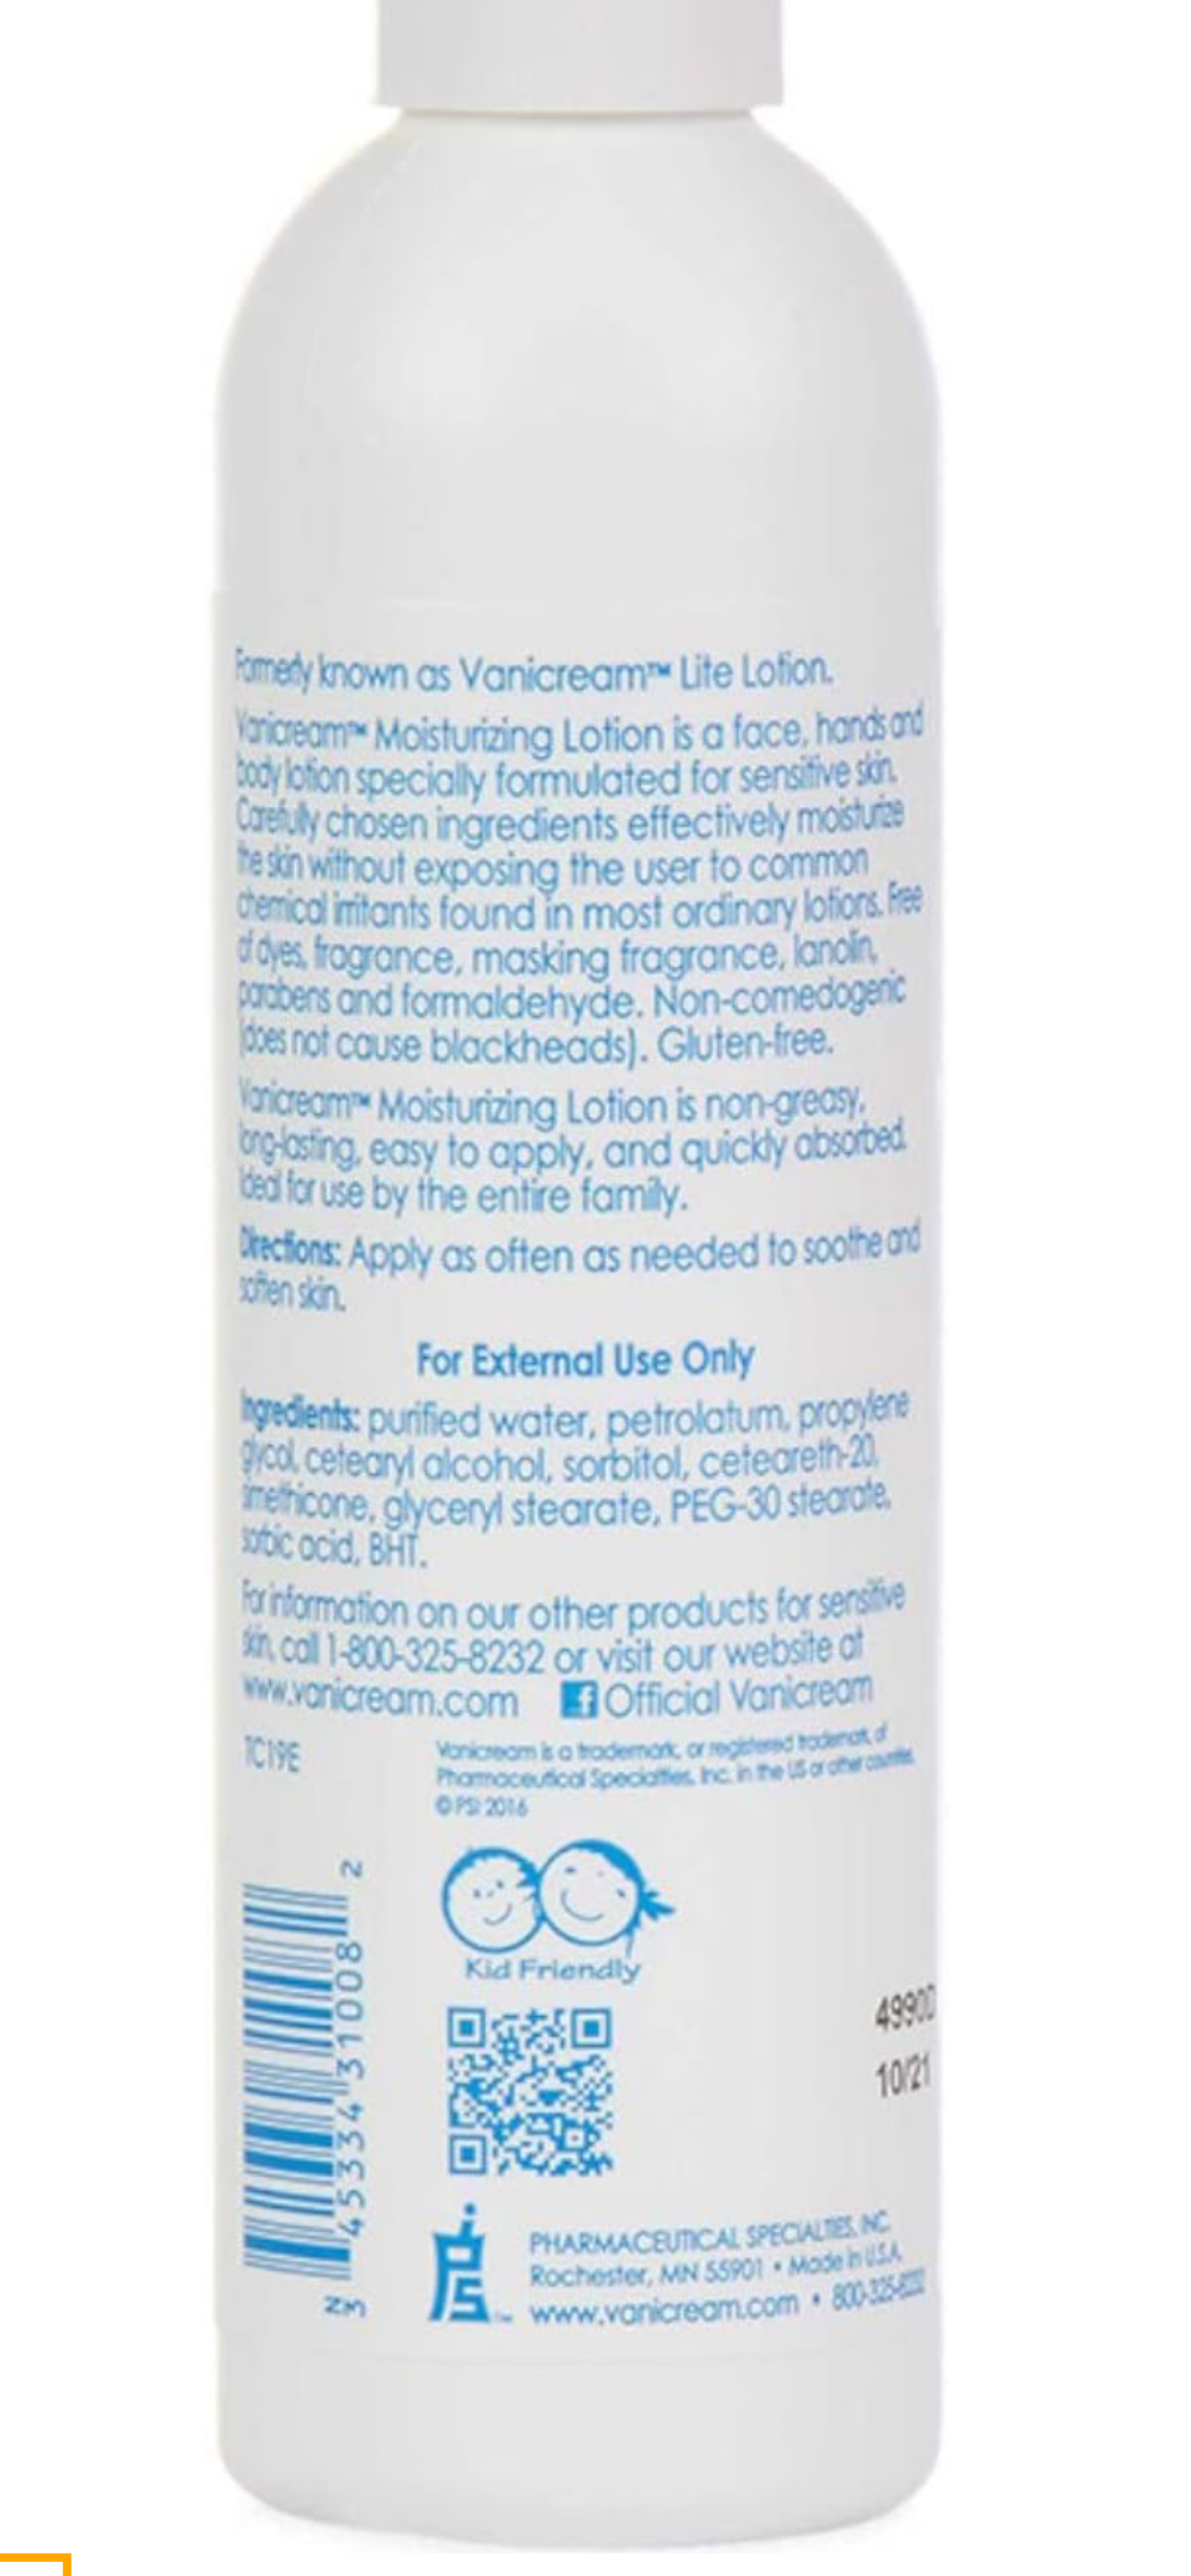 Vanicream MOISTURIZING SKIN LITE LOTION for SENSITIVE SKIN 8oz Ounce 227g - Supporting ORCRF.org